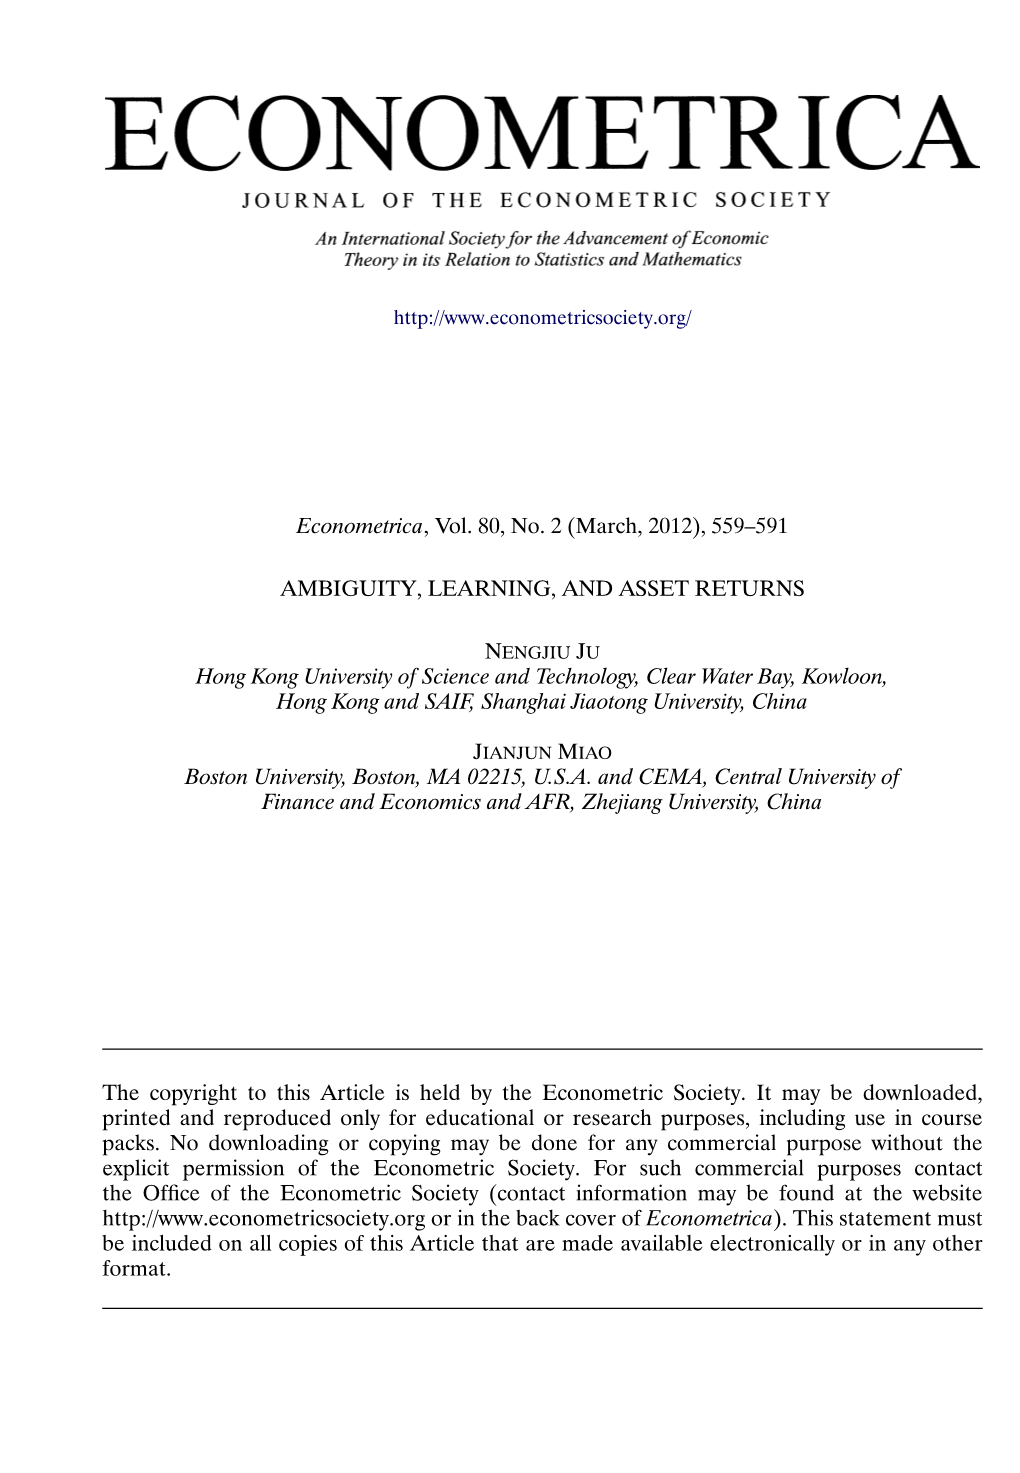 Ambiguity, Learning, and Asset Returns